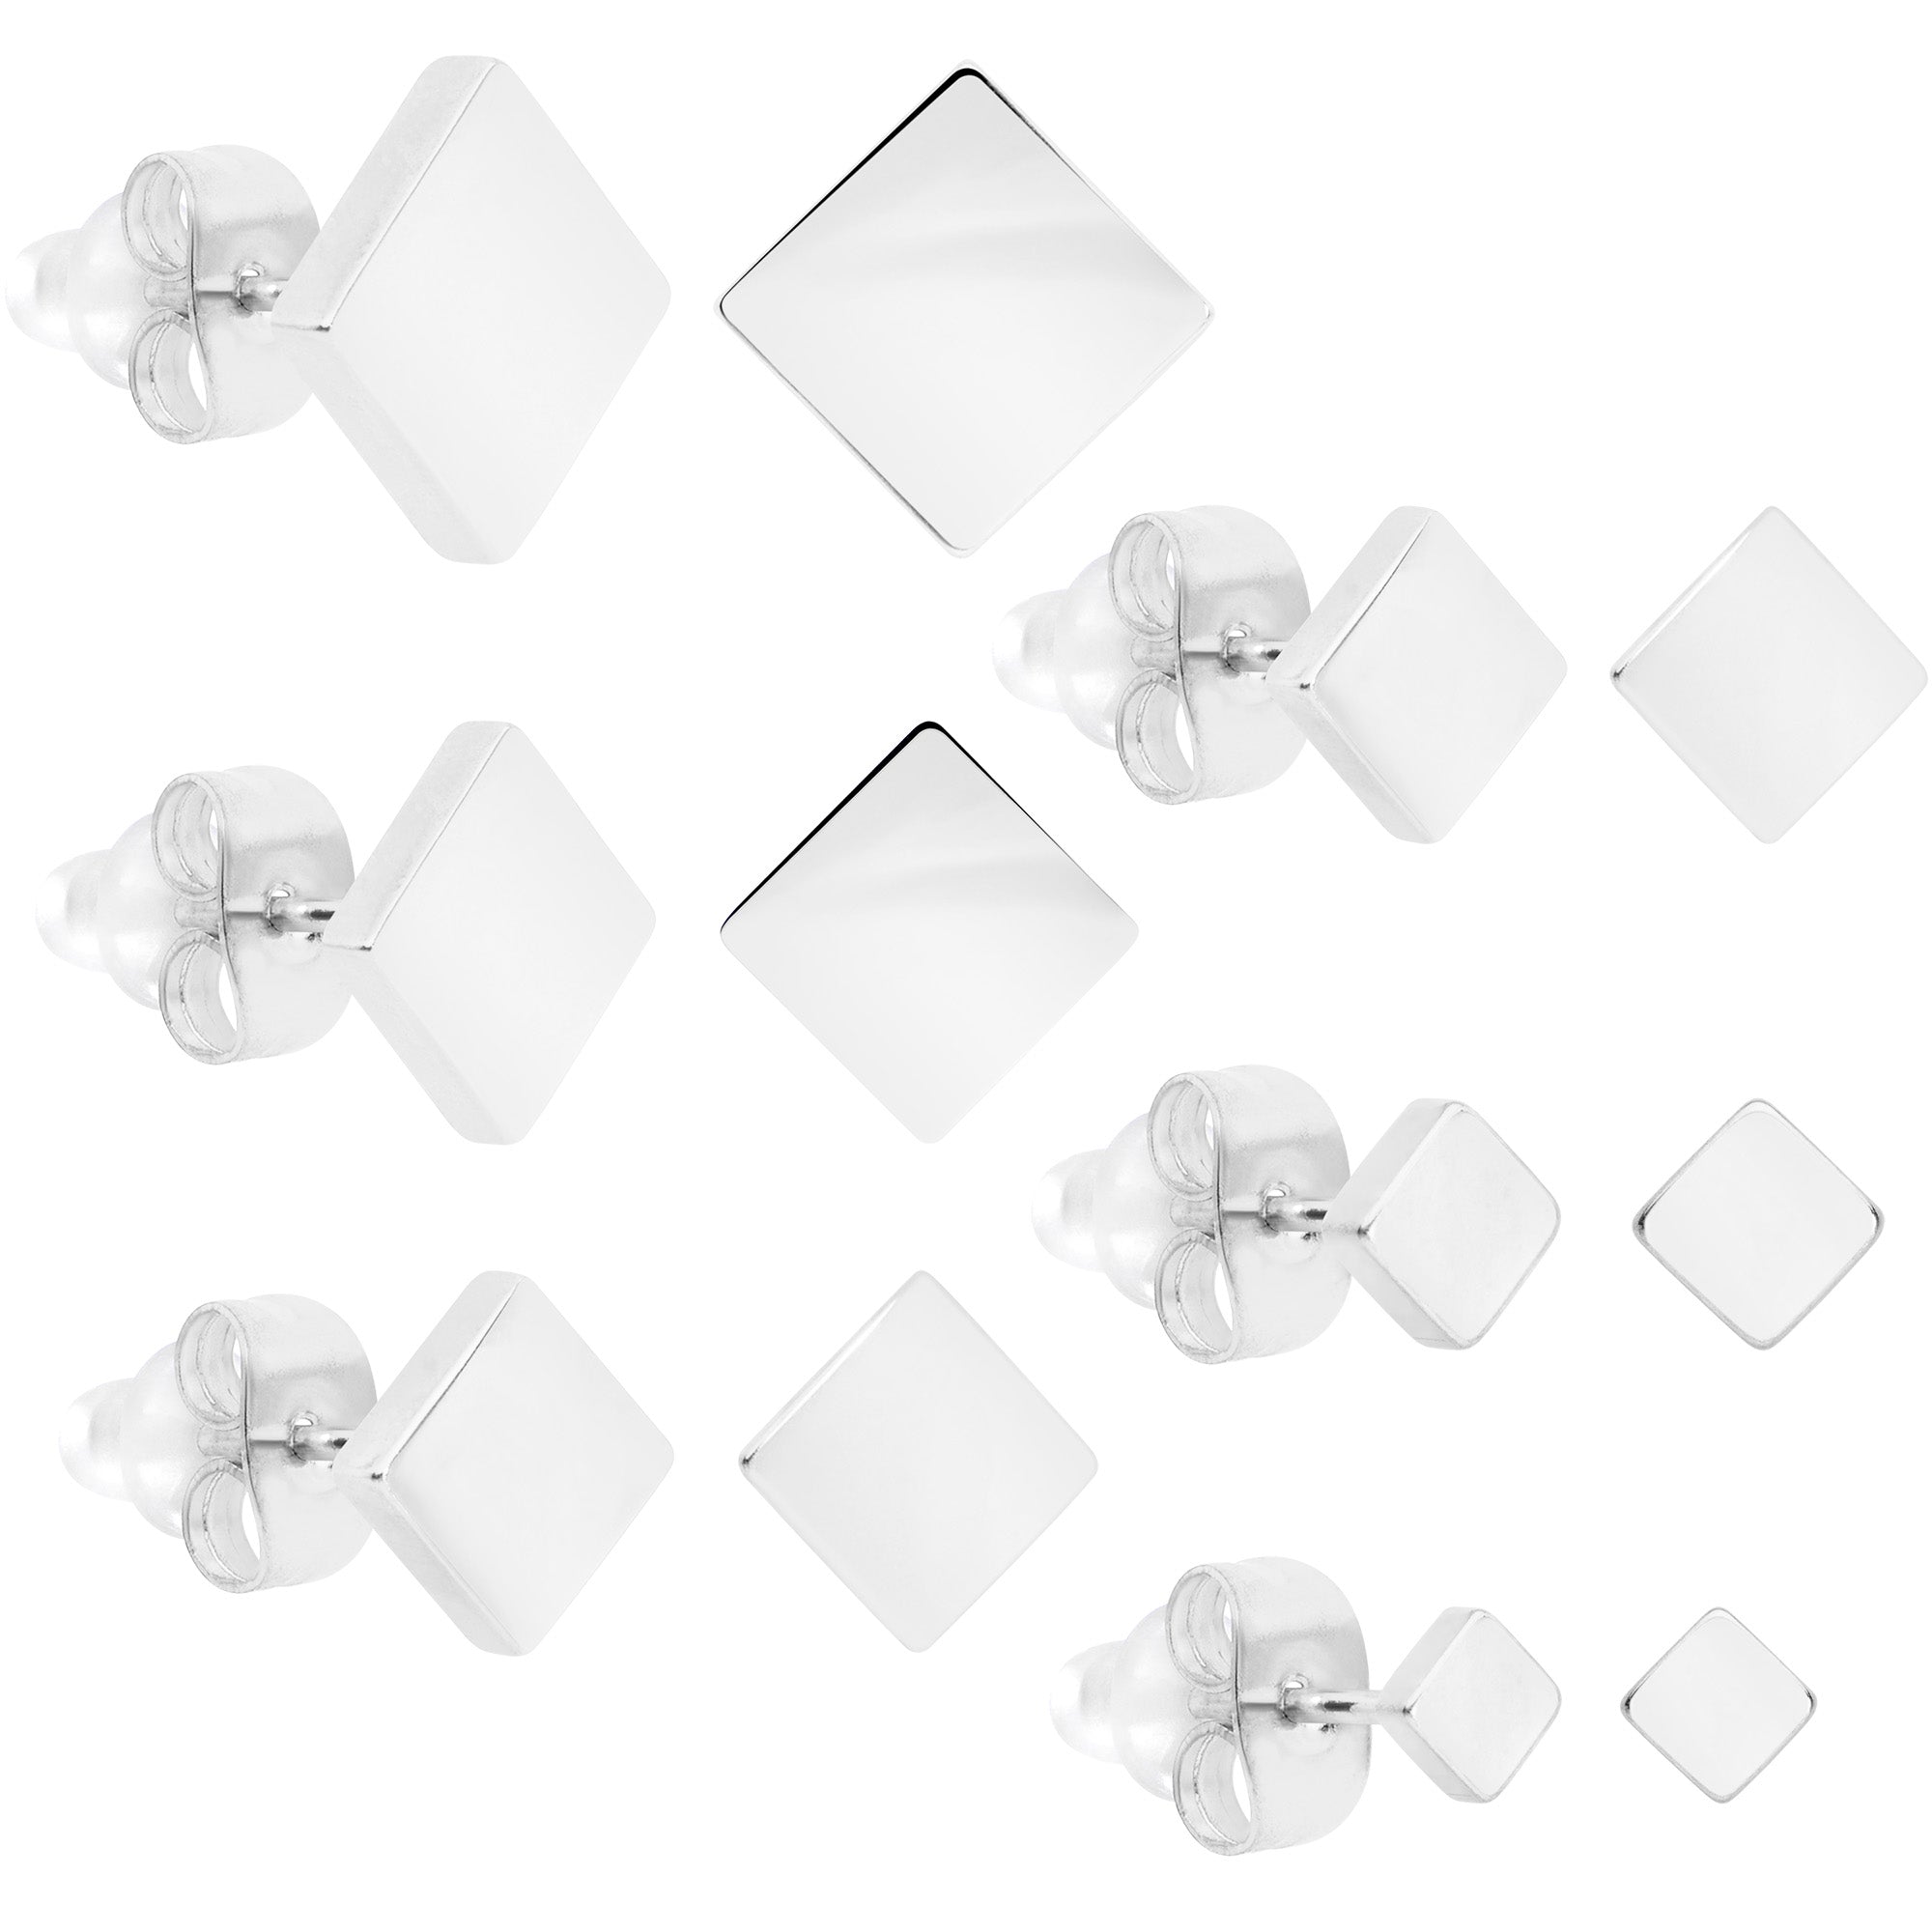 3mm-8mm Square Stud 316L Stainless Steel Earrings 6 Pack